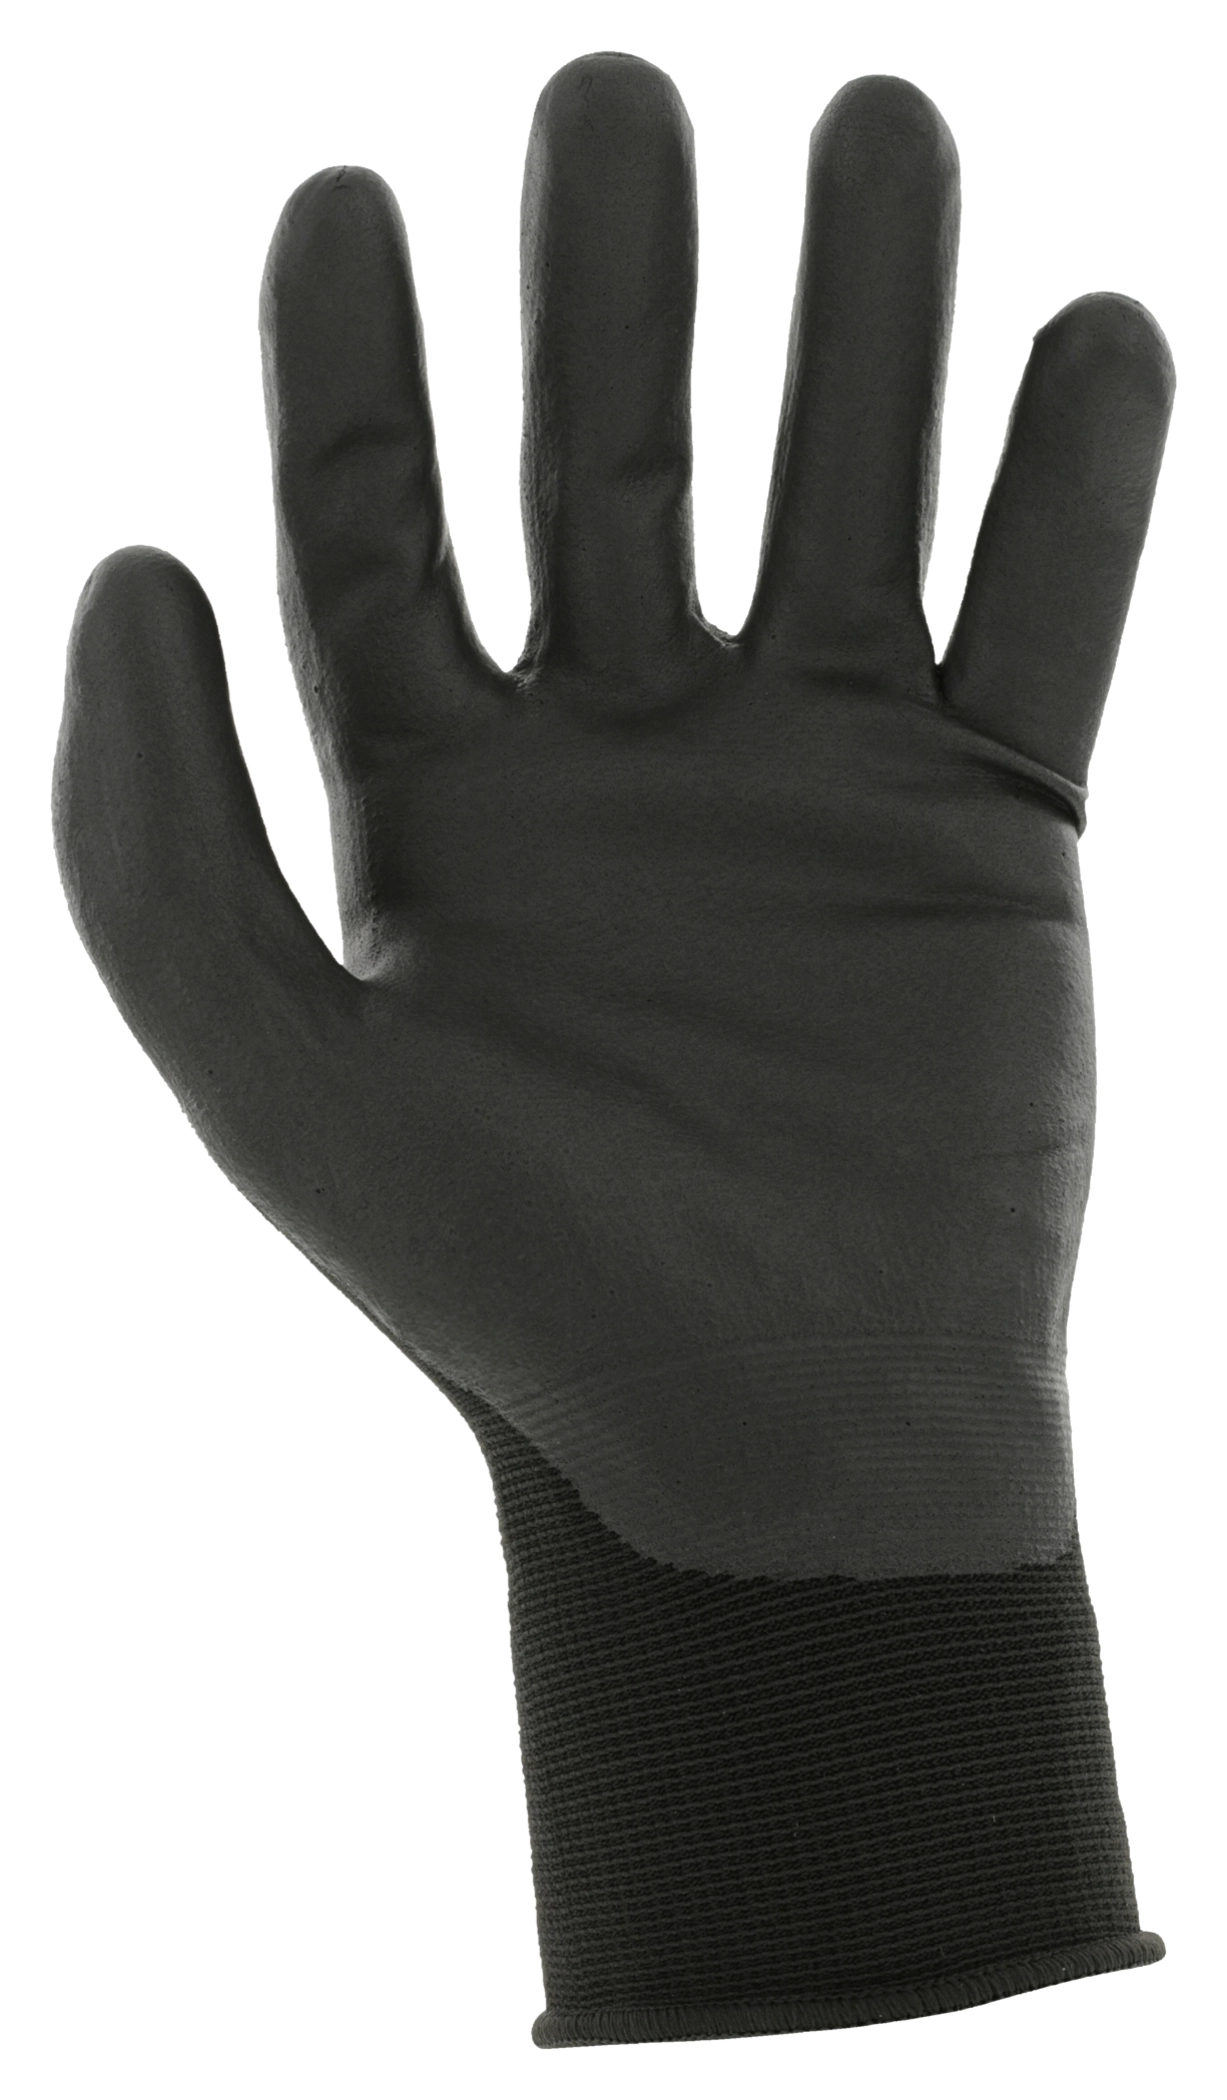 Mechanix Wear: M-Pact Covert Tactical Gloves with Secure Fit, Touchscreen  Capable Safety Gloves for Men, Work Gloves with Impact Protection and  Vibration Absorption (Black, Large) - Powersports Gloves 